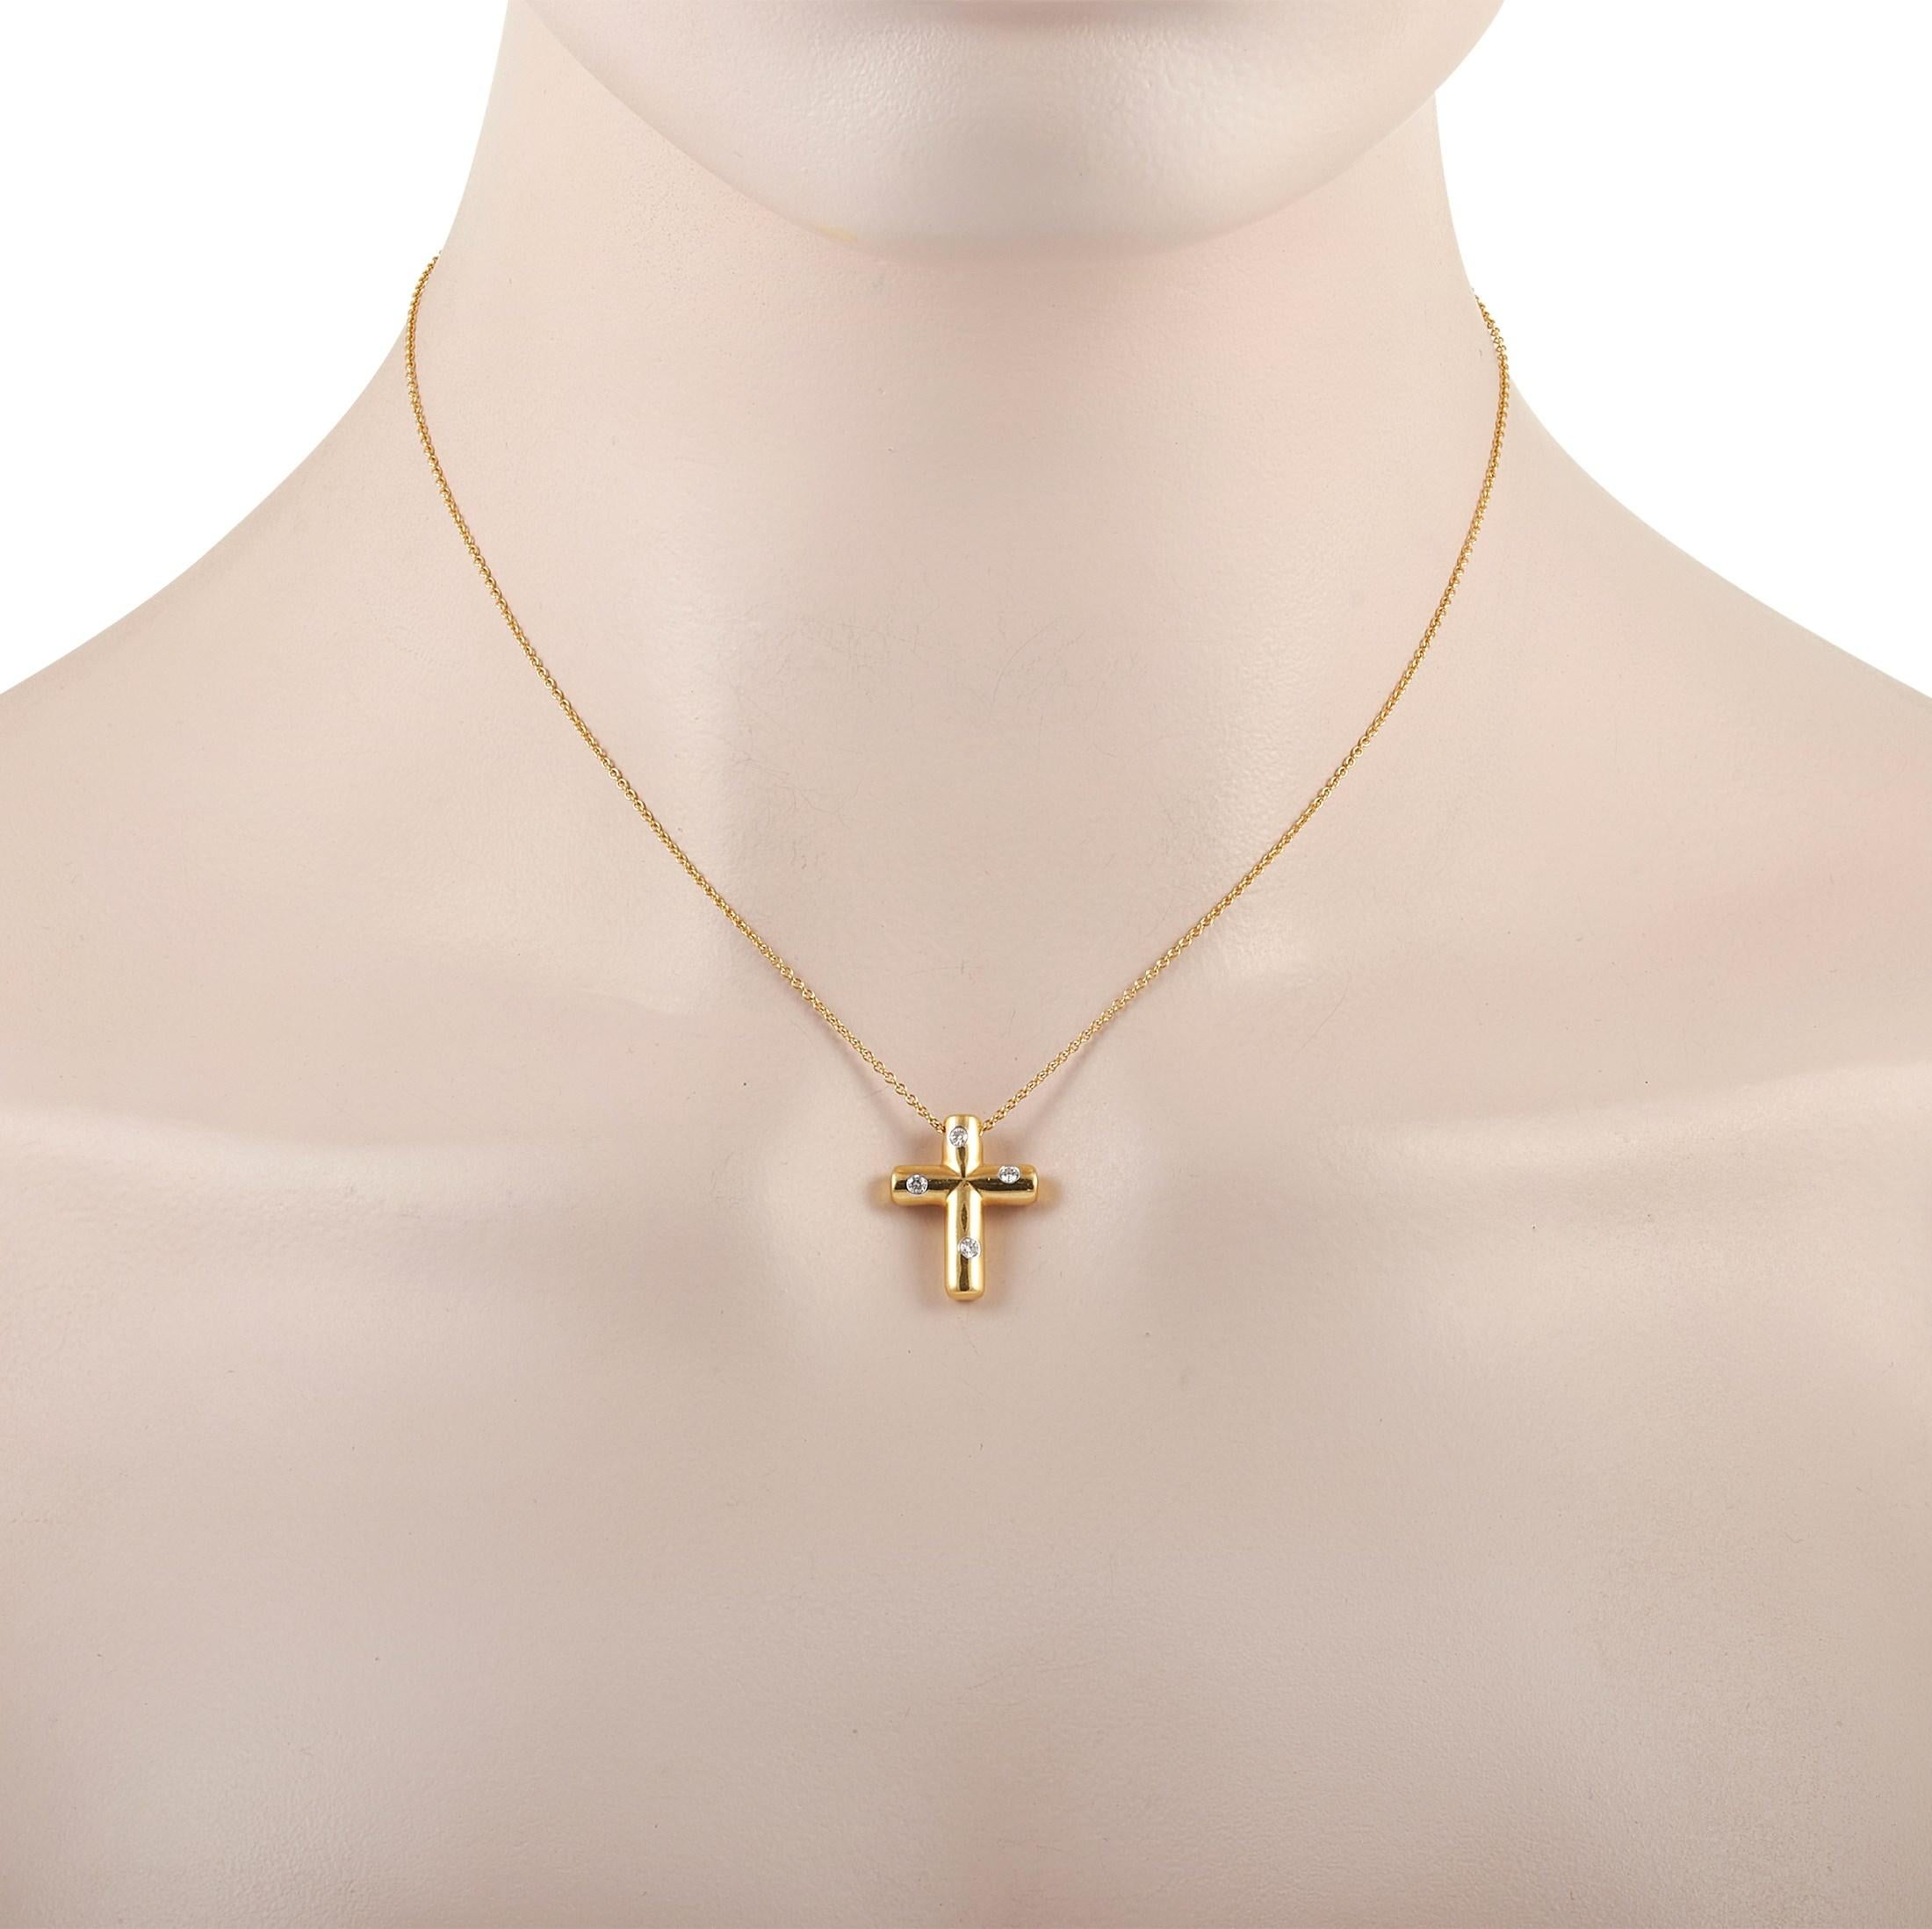 This Tiffany & Co. 18K Yellow Gold Diamond Cross Pendant Necklace is made with 18K Yellow Gold and features a delicate chain that measures 15 inches in length. The 18K Yellow Gold Cross Pendant measures 0.75 inches in length and 0.57 inches in width